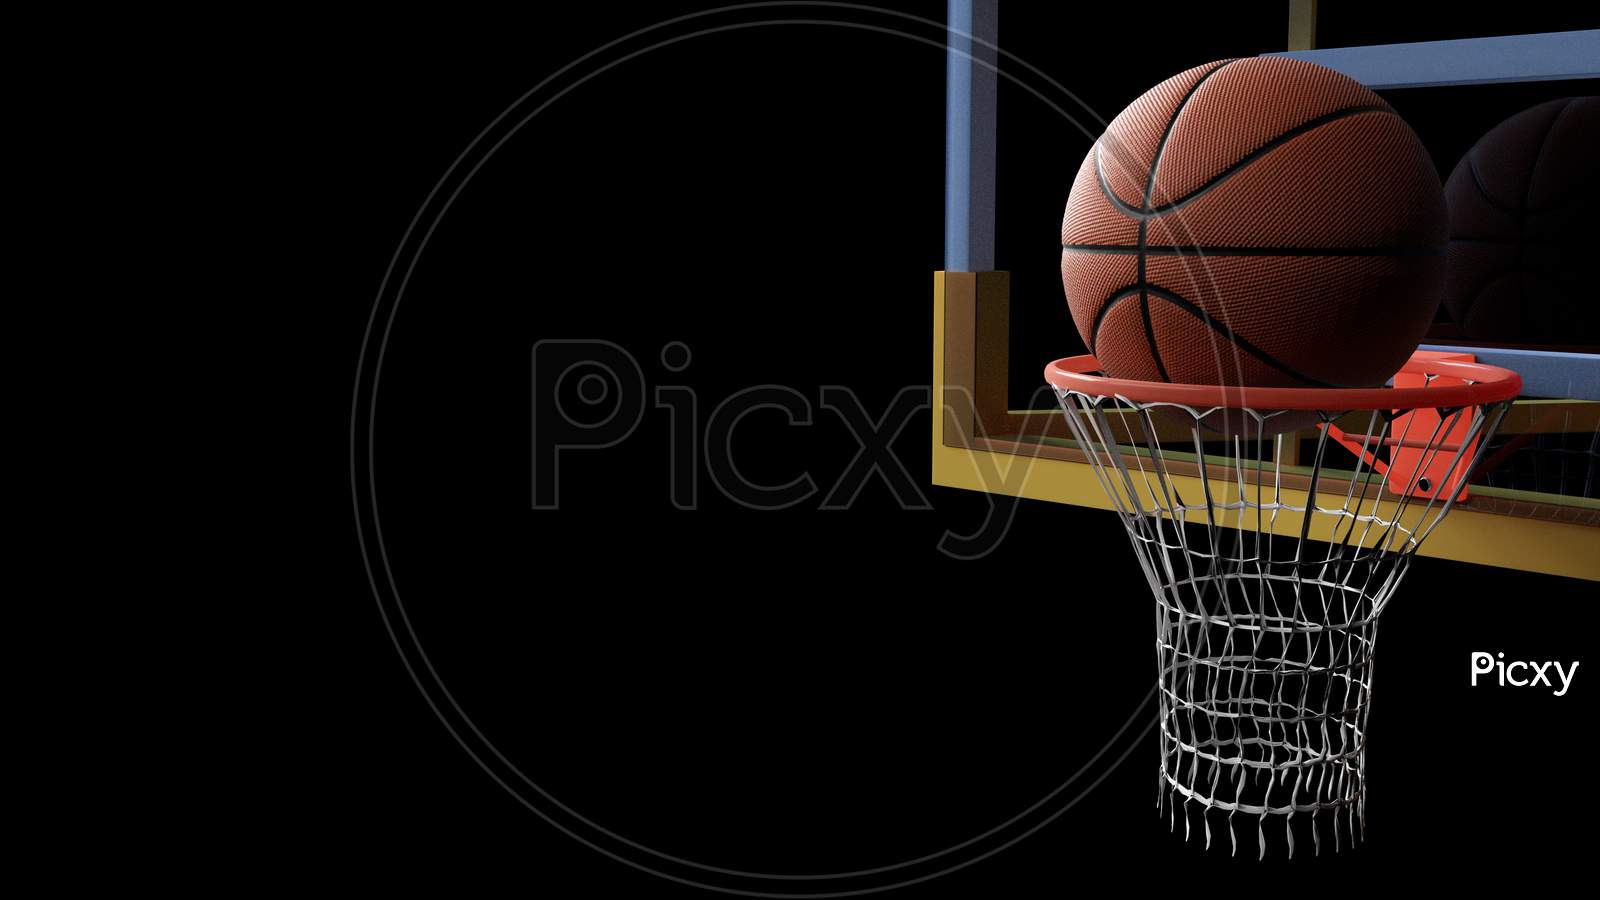 Basketball Going Into Hoop On Black Isolated Background. Sport And Competitive Game Concept. 3D Illustration.